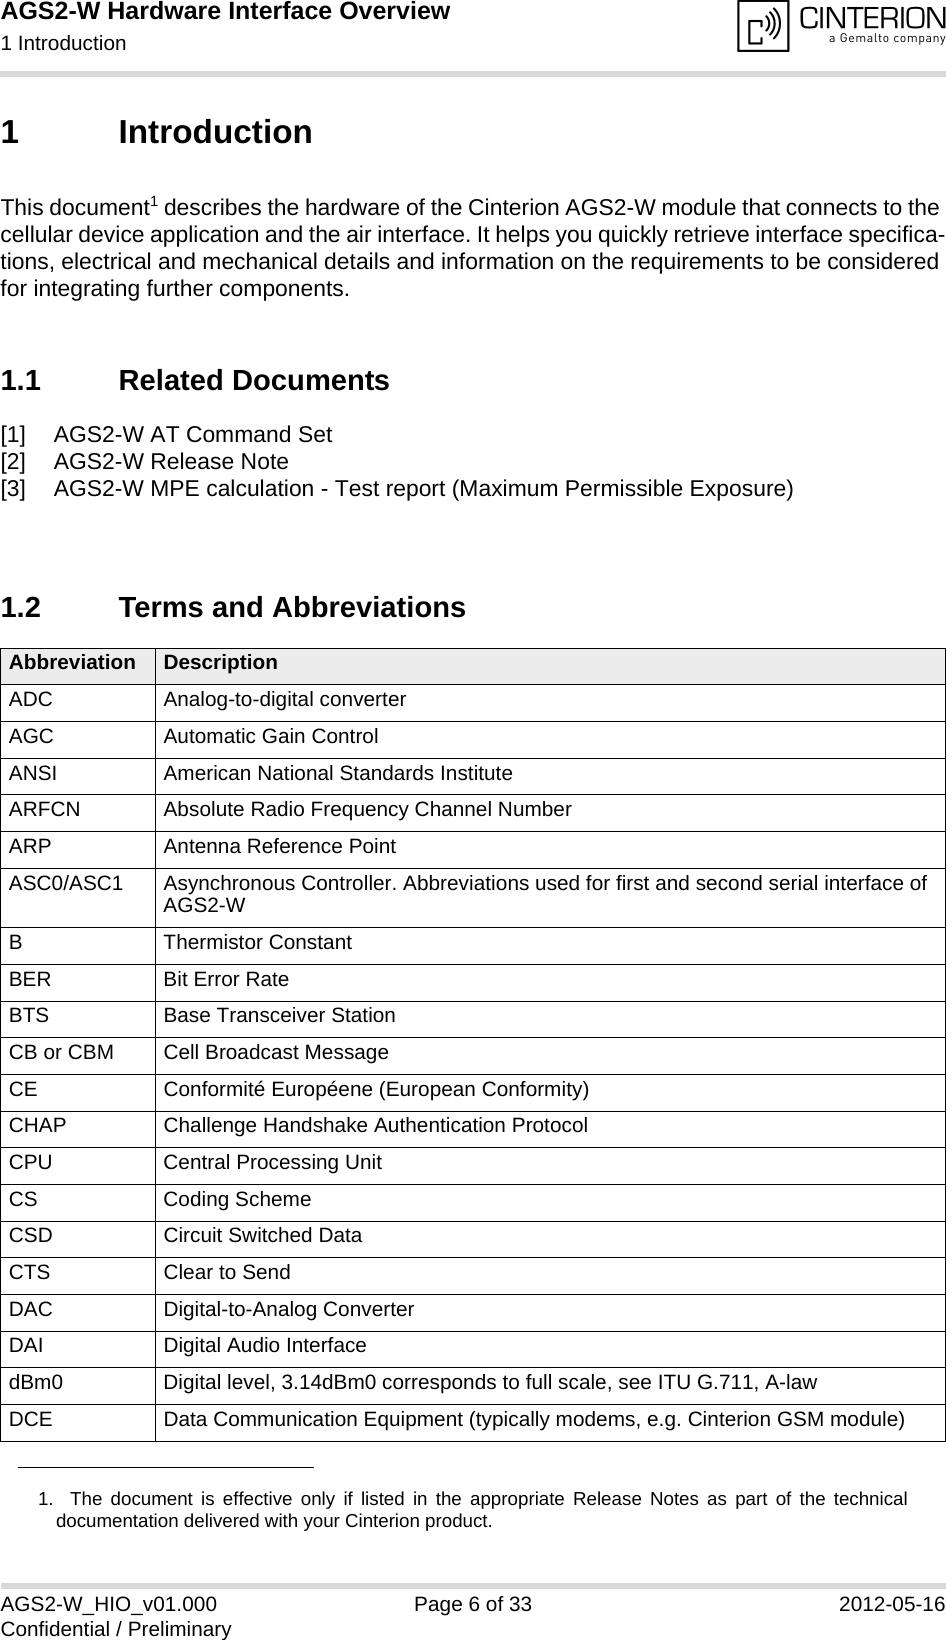 AGS2-W Hardware Interface Overview1 Introduction14AGS2-W_HIO_v01.000 Page 6 of 33 2012-05-16Confidential / Preliminary1 IntroductionThis document1 describes the hardware of the Cinterion AGS2-W module that connects to the cellular device application and the air interface. It helps you quickly retrieve interface specifica-tions, electrical and mechanical details and information on the requirements to be considered for integrating further components.1.1 Related Documents[1] AGS2-W AT Command Set[2] AGS2-W Release Note[3] AGS2-W MPE calculation - Test report (Maximum Permissible Exposure)1.2 Terms and Abbreviations1.  The document is effective only if listed in the appropriate Release Notes as part of the technicaldocumentation delivered with your Cinterion product.Abbreviation DescriptionADC Analog-to-digital converterAGC Automatic Gain ControlANSI American National Standards InstituteARFCN Absolute Radio Frequency Channel NumberARP Antenna Reference PointASC0/ASC1 Asynchronous Controller. Abbreviations used for first and second serial interface of AGS2-WB Thermistor ConstantBER Bit Error RateBTS Base Transceiver StationCB or CBM Cell Broadcast MessageCE Conformité Européene (European Conformity)CHAP Challenge Handshake Authentication ProtocolCPU Central Processing UnitCS Coding SchemeCSD Circuit Switched DataCTS Clear to SendDAC Digital-to-Analog ConverterDAI Digital Audio InterfacedBm0 Digital level, 3.14dBm0 corresponds to full scale, see ITU G.711, A-lawDCE Data Communication Equipment (typically modems, e.g. Cinterion GSM module)